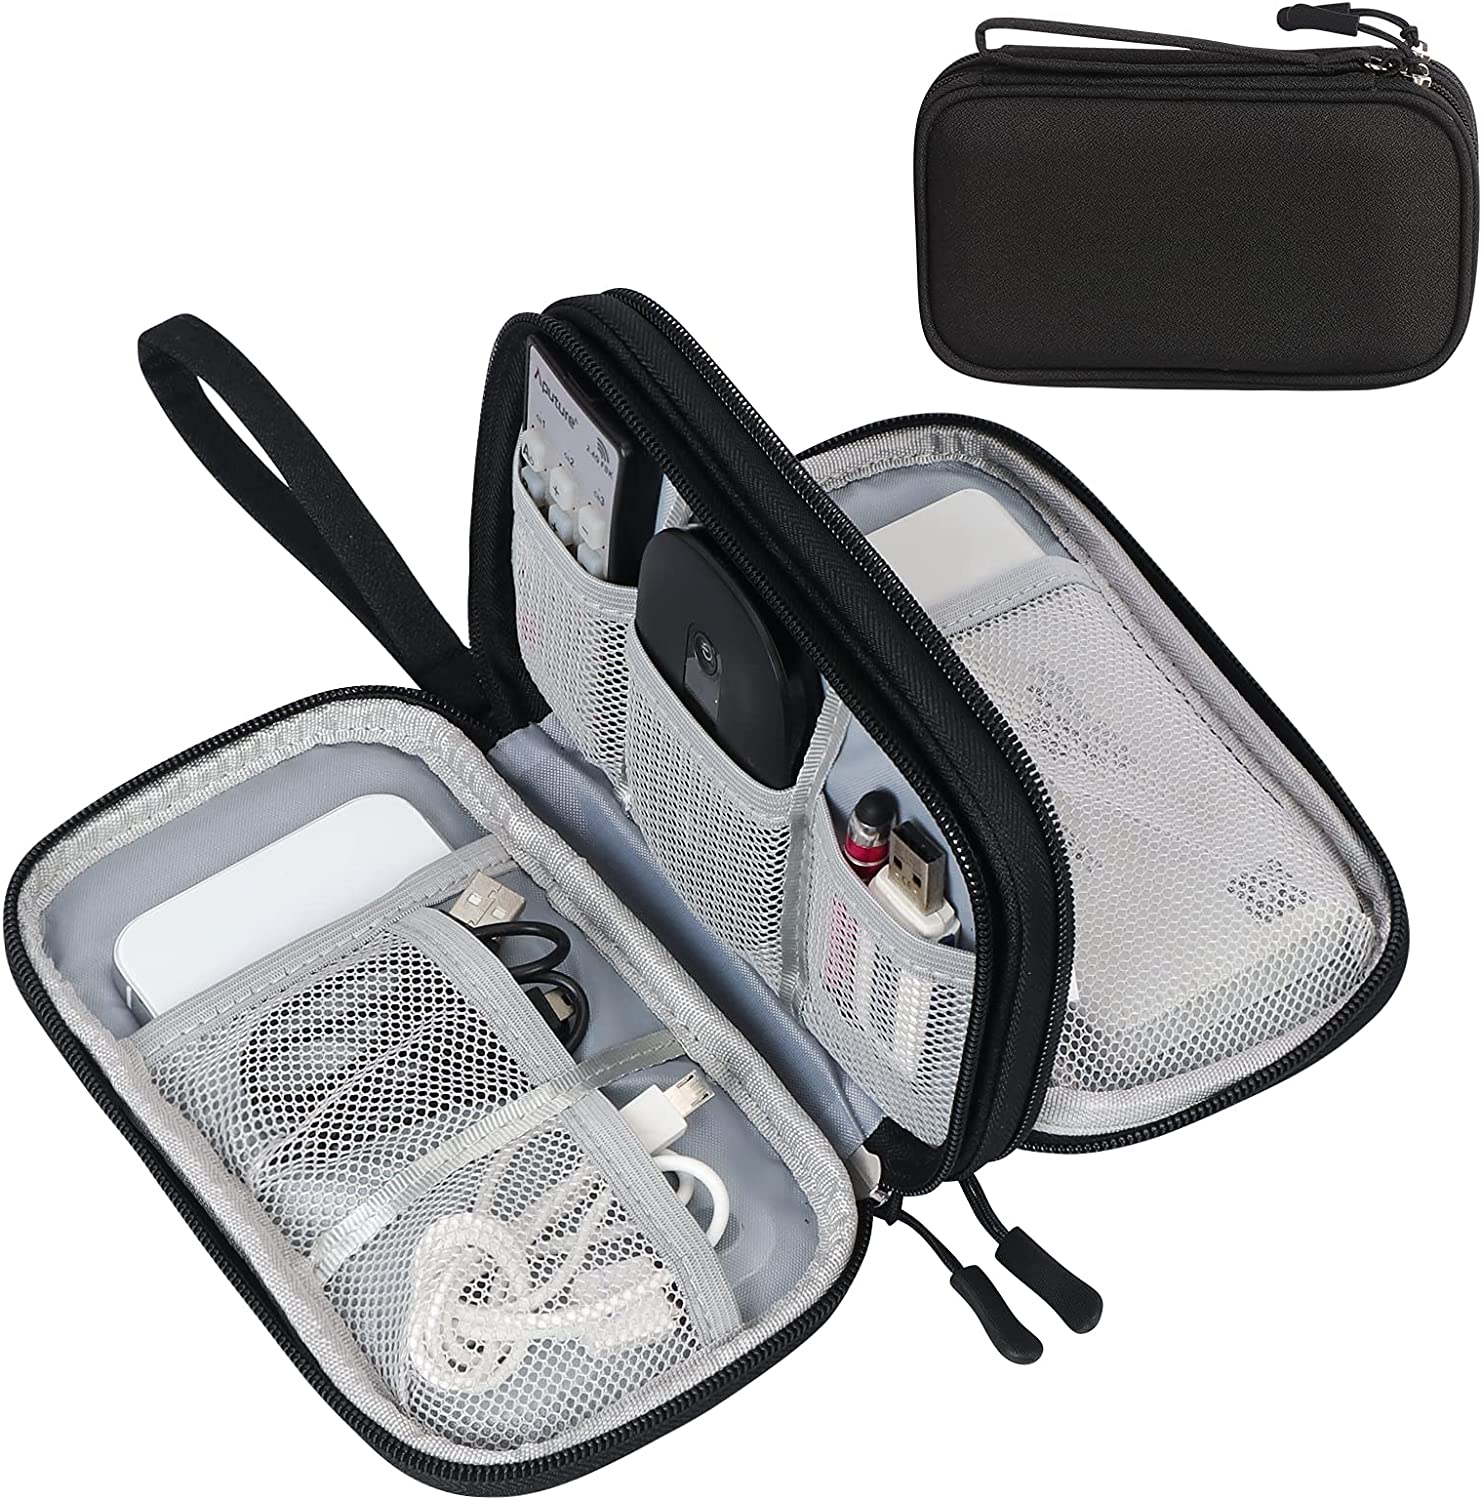 FYY Electronic Organizer, Travel Cable Organizer Bag Pouch Electronic Accessories Carry Case Portable Waterproof Double Layers All-in-One Storage Bag for... by FYY on Amazon - honeymoon gift ideas for newlyweds - The Wedding Club